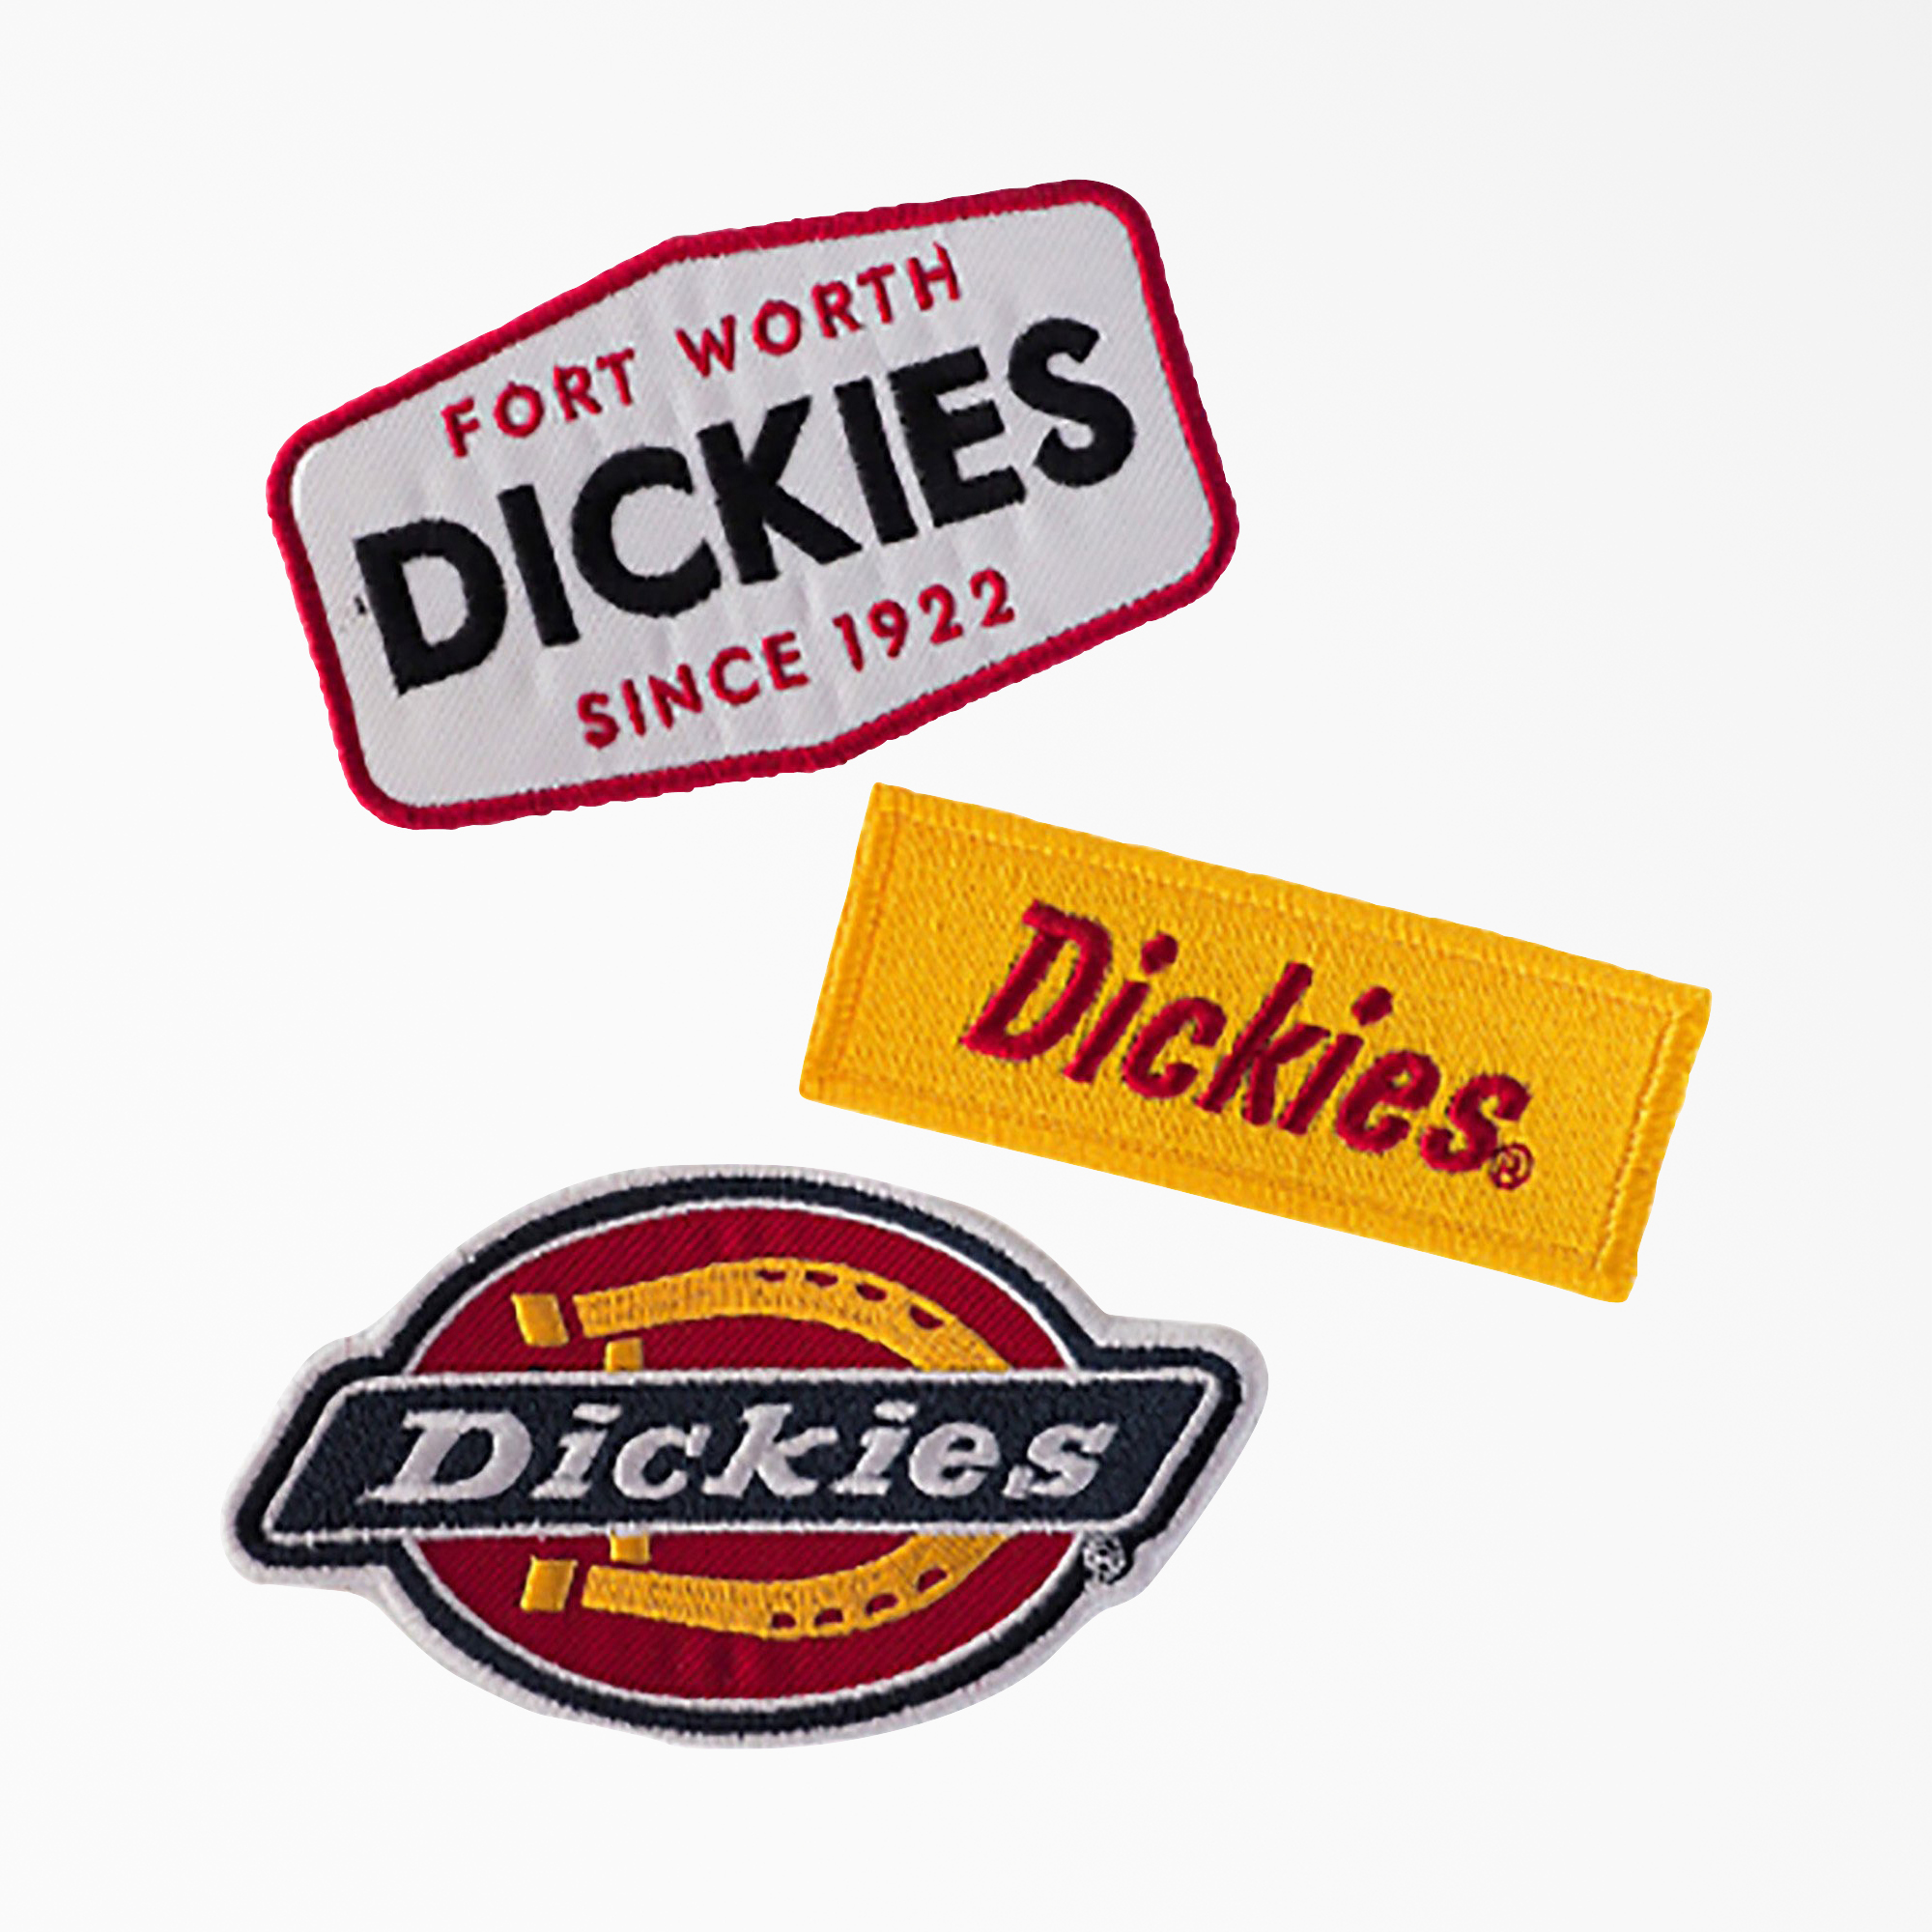 Dickies Logo Iron-on Patches, 3-Pack - Assorted Colors (QA)